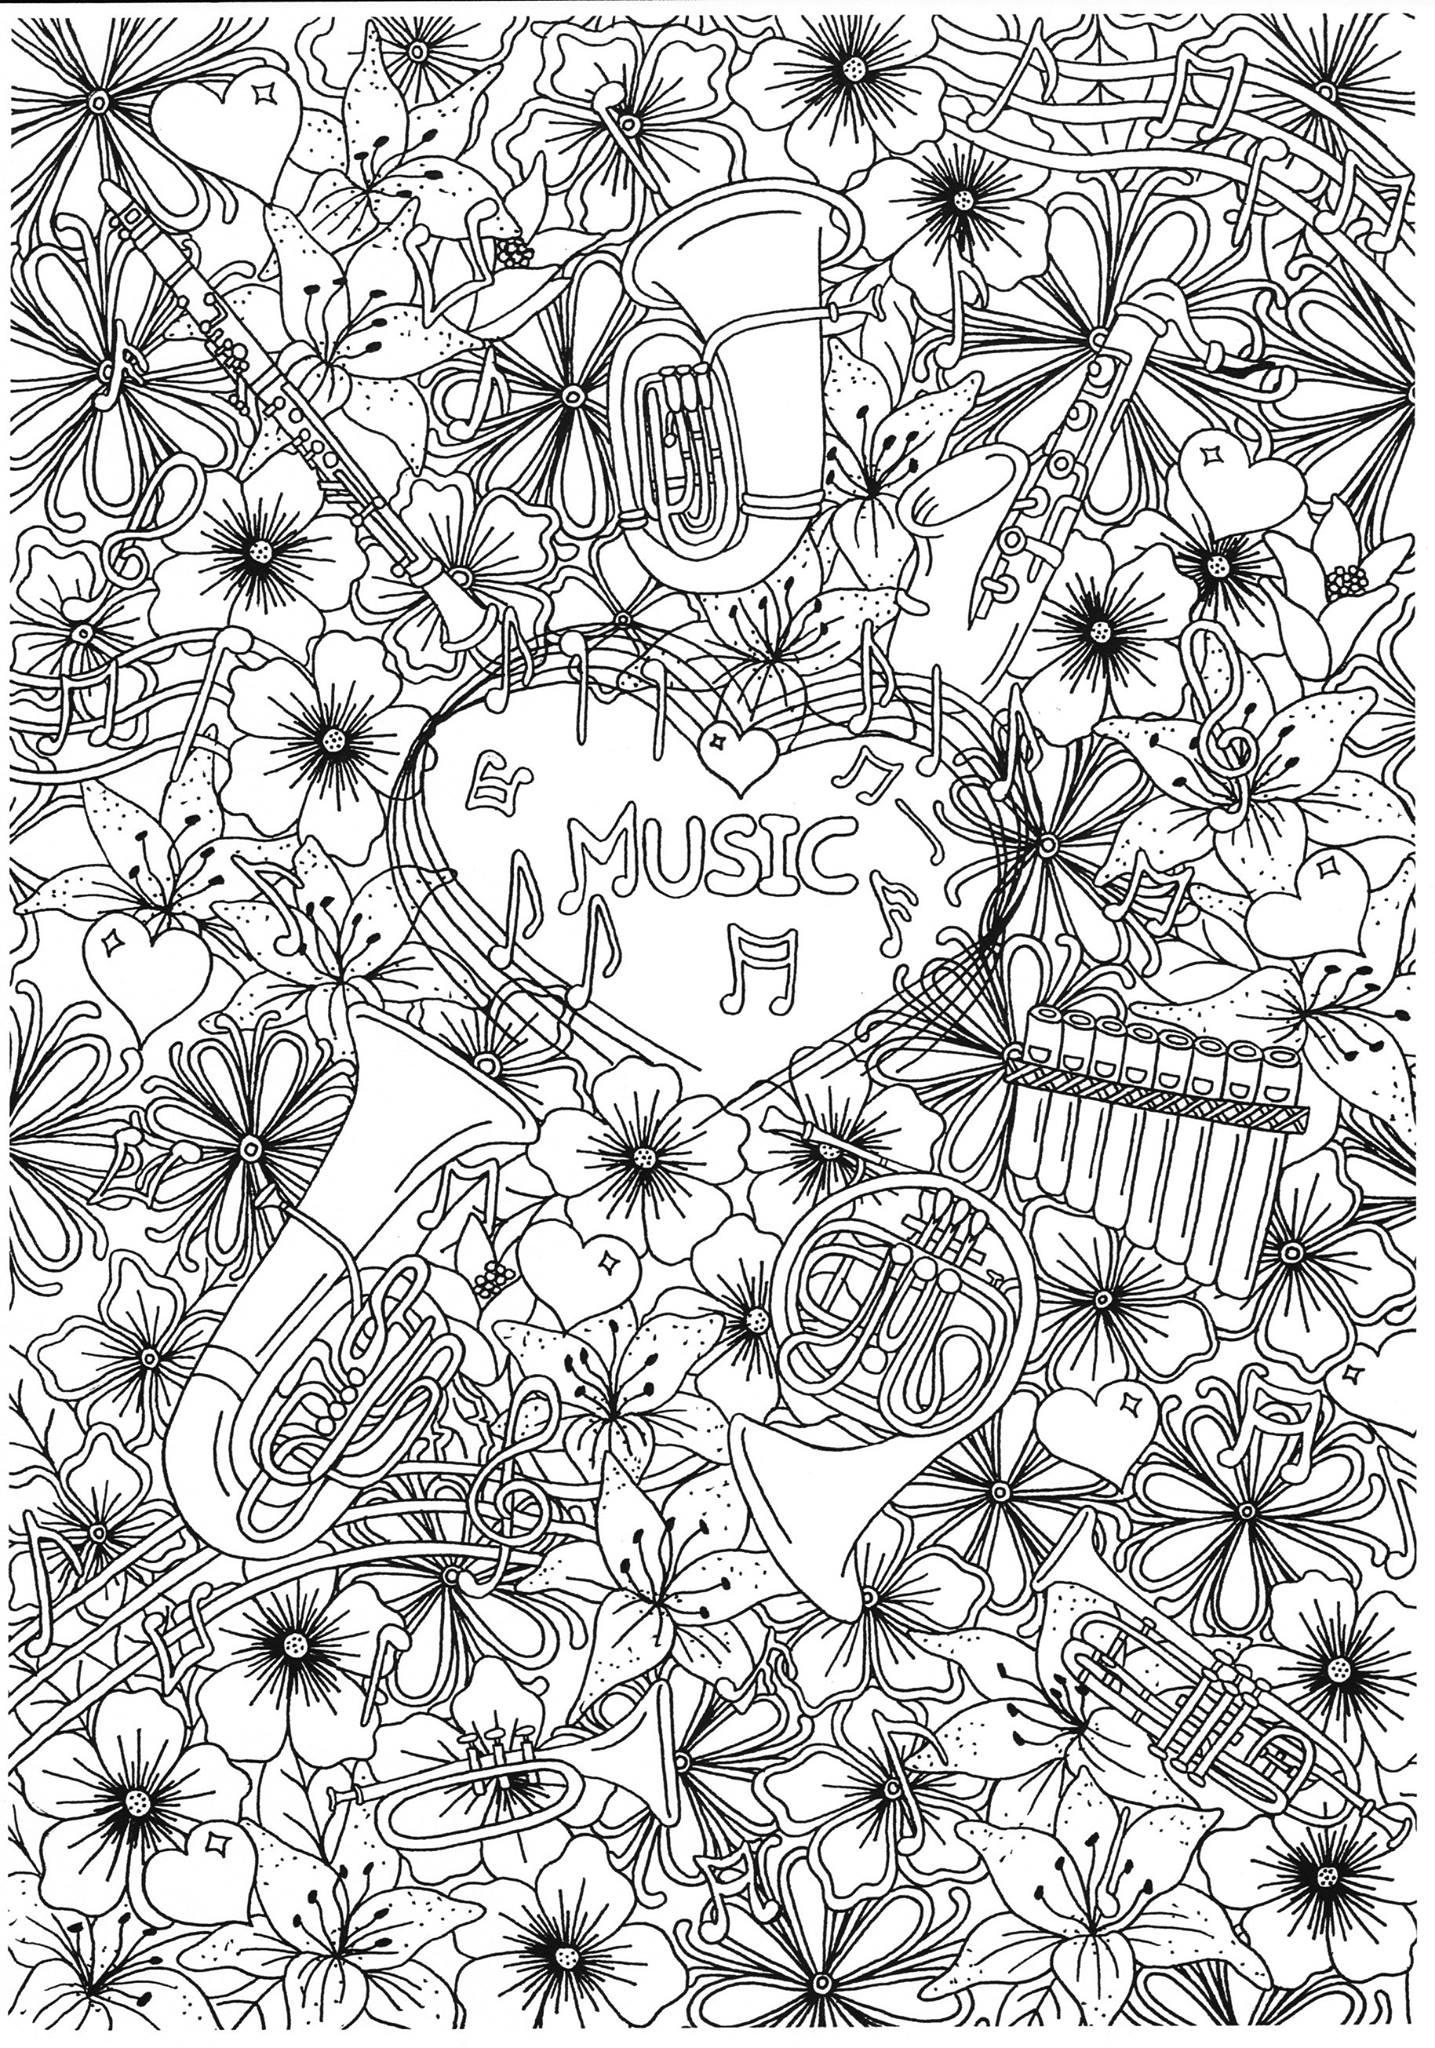 Coloring page music wind instruments